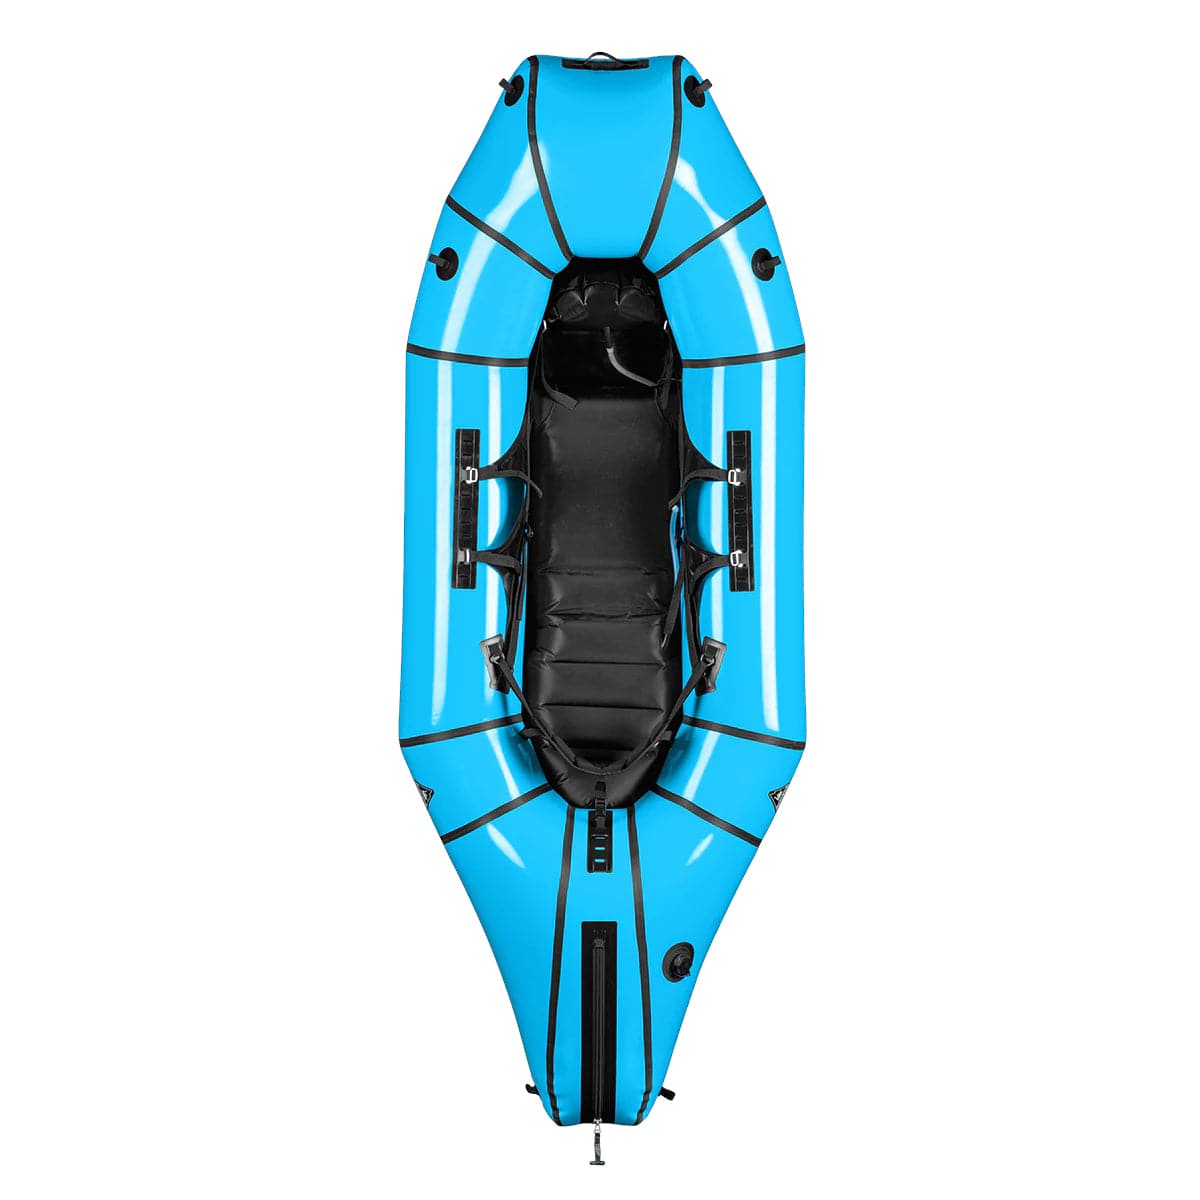 Featuring the GnarMule pack raft, pack rafting manufactured by Alpacka shown here from a sixth angle.